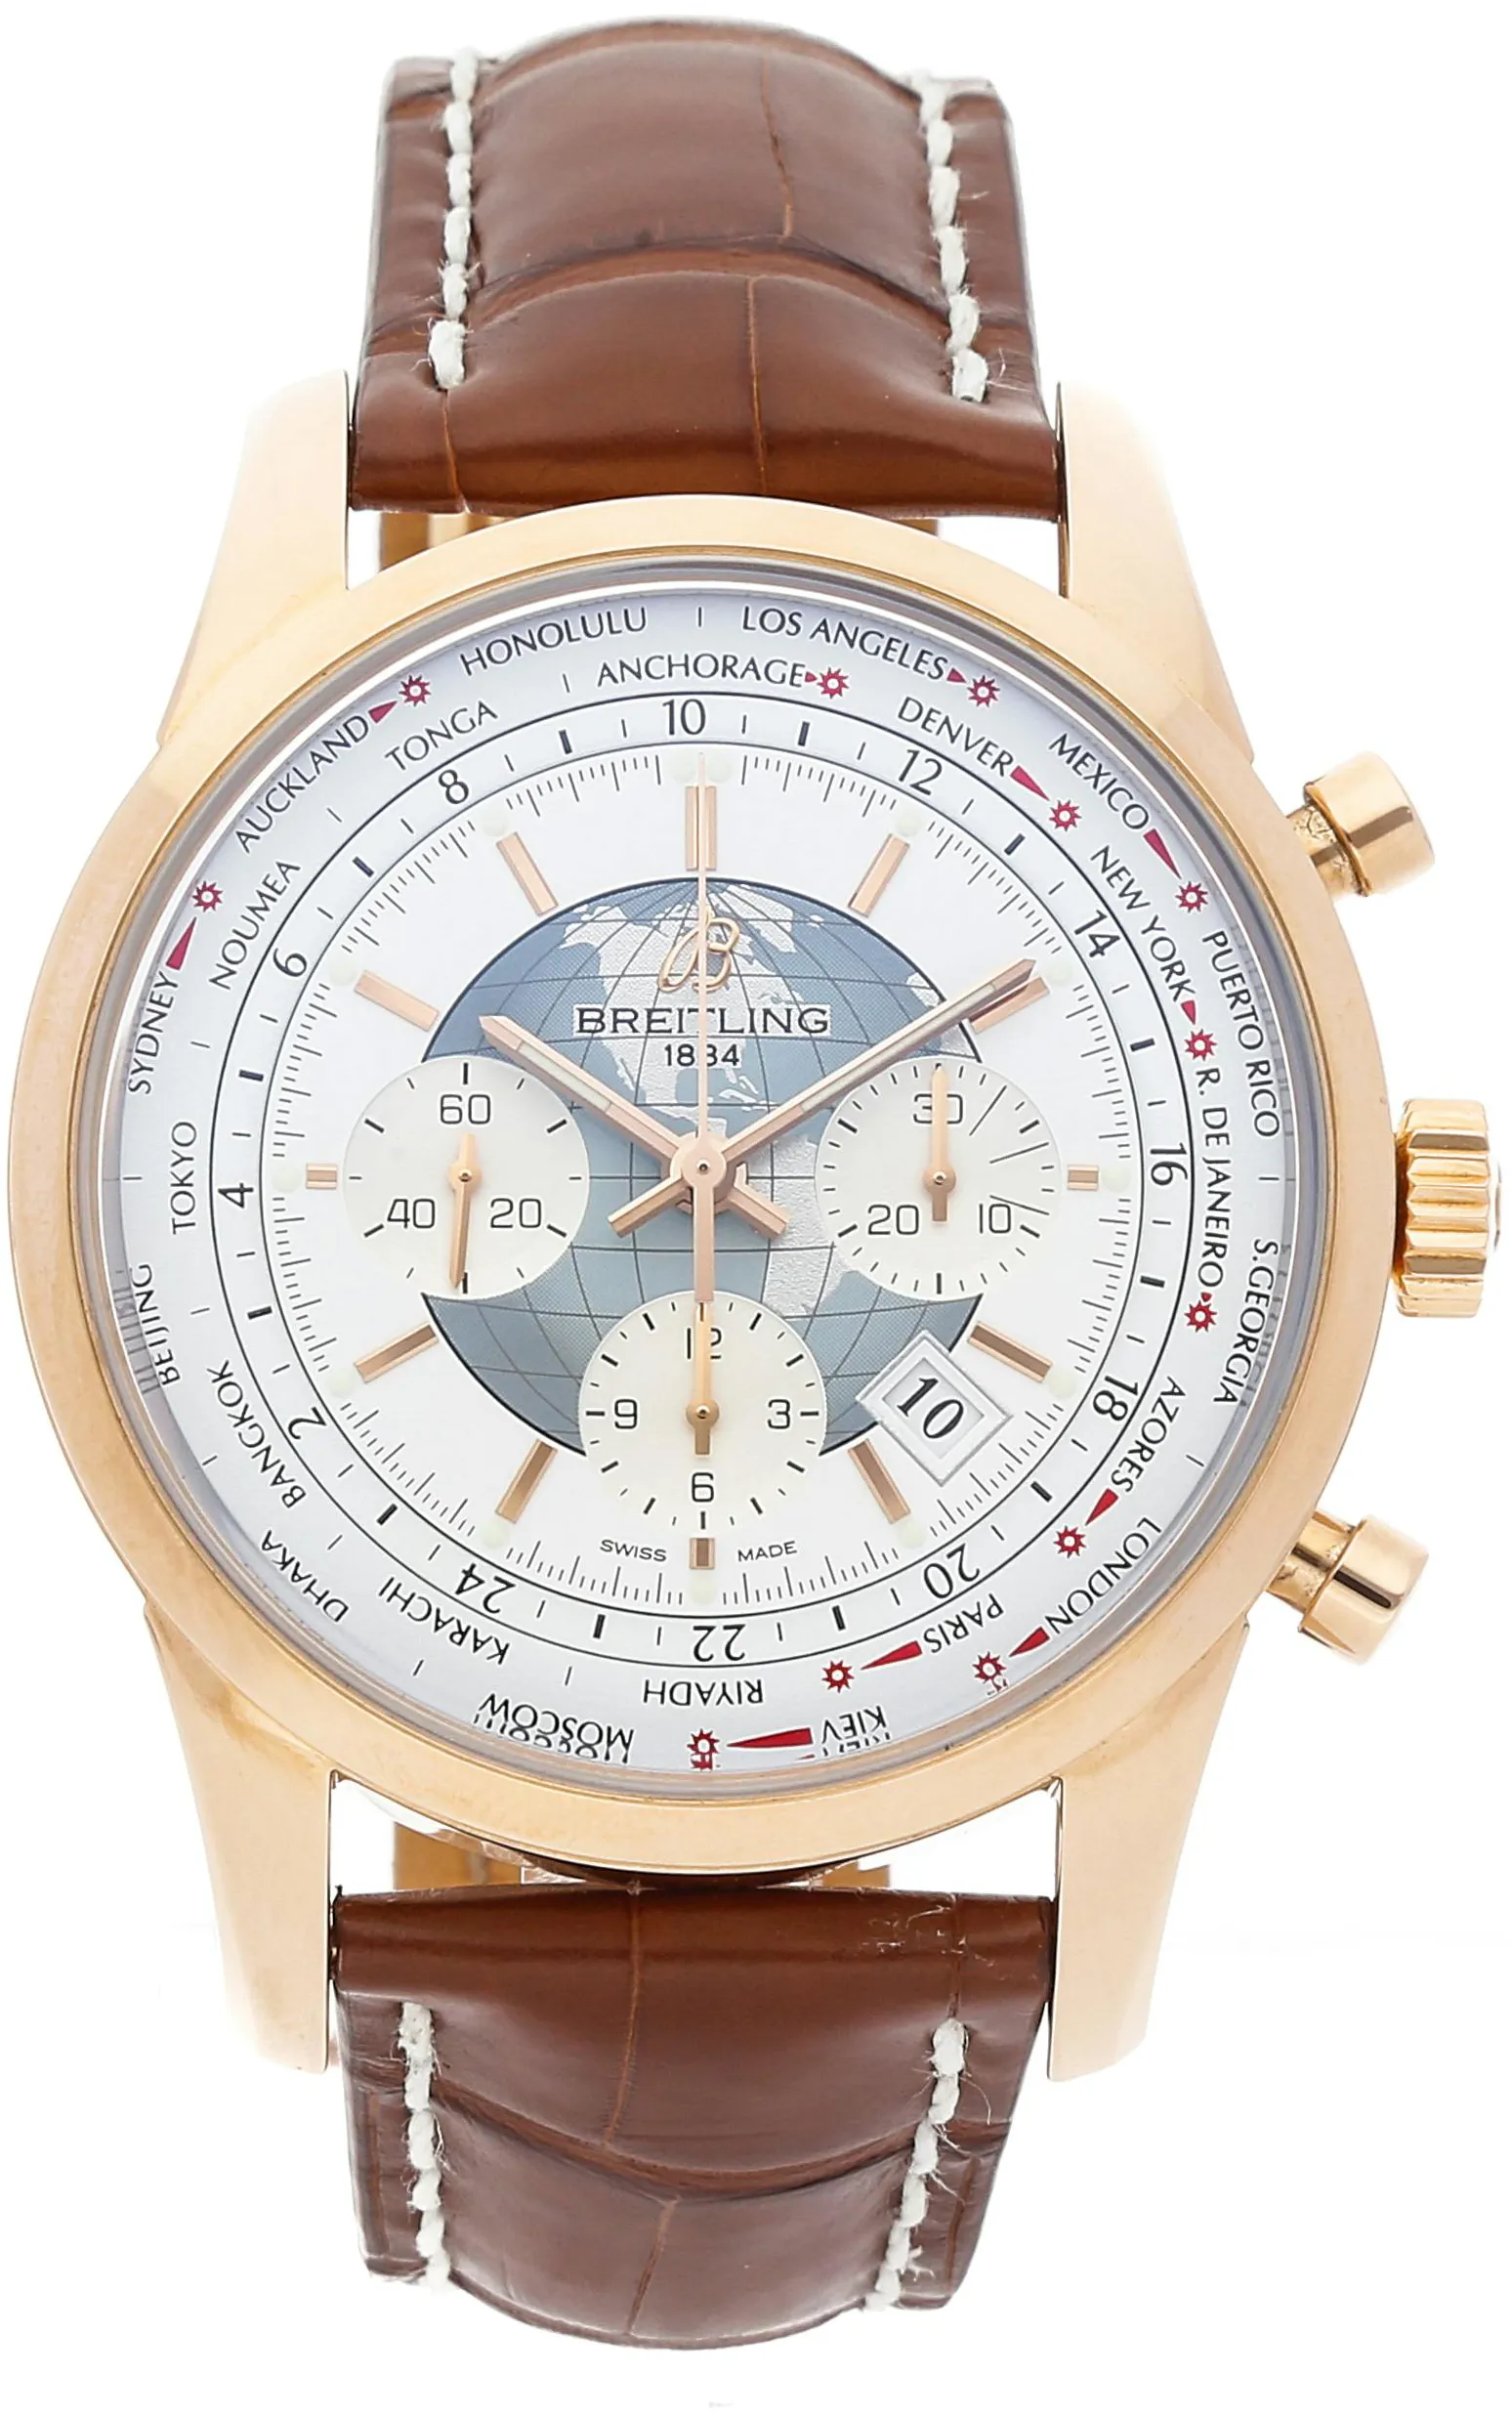 Breitling Transocean RB0510U0/A733 46mm Rose gold White